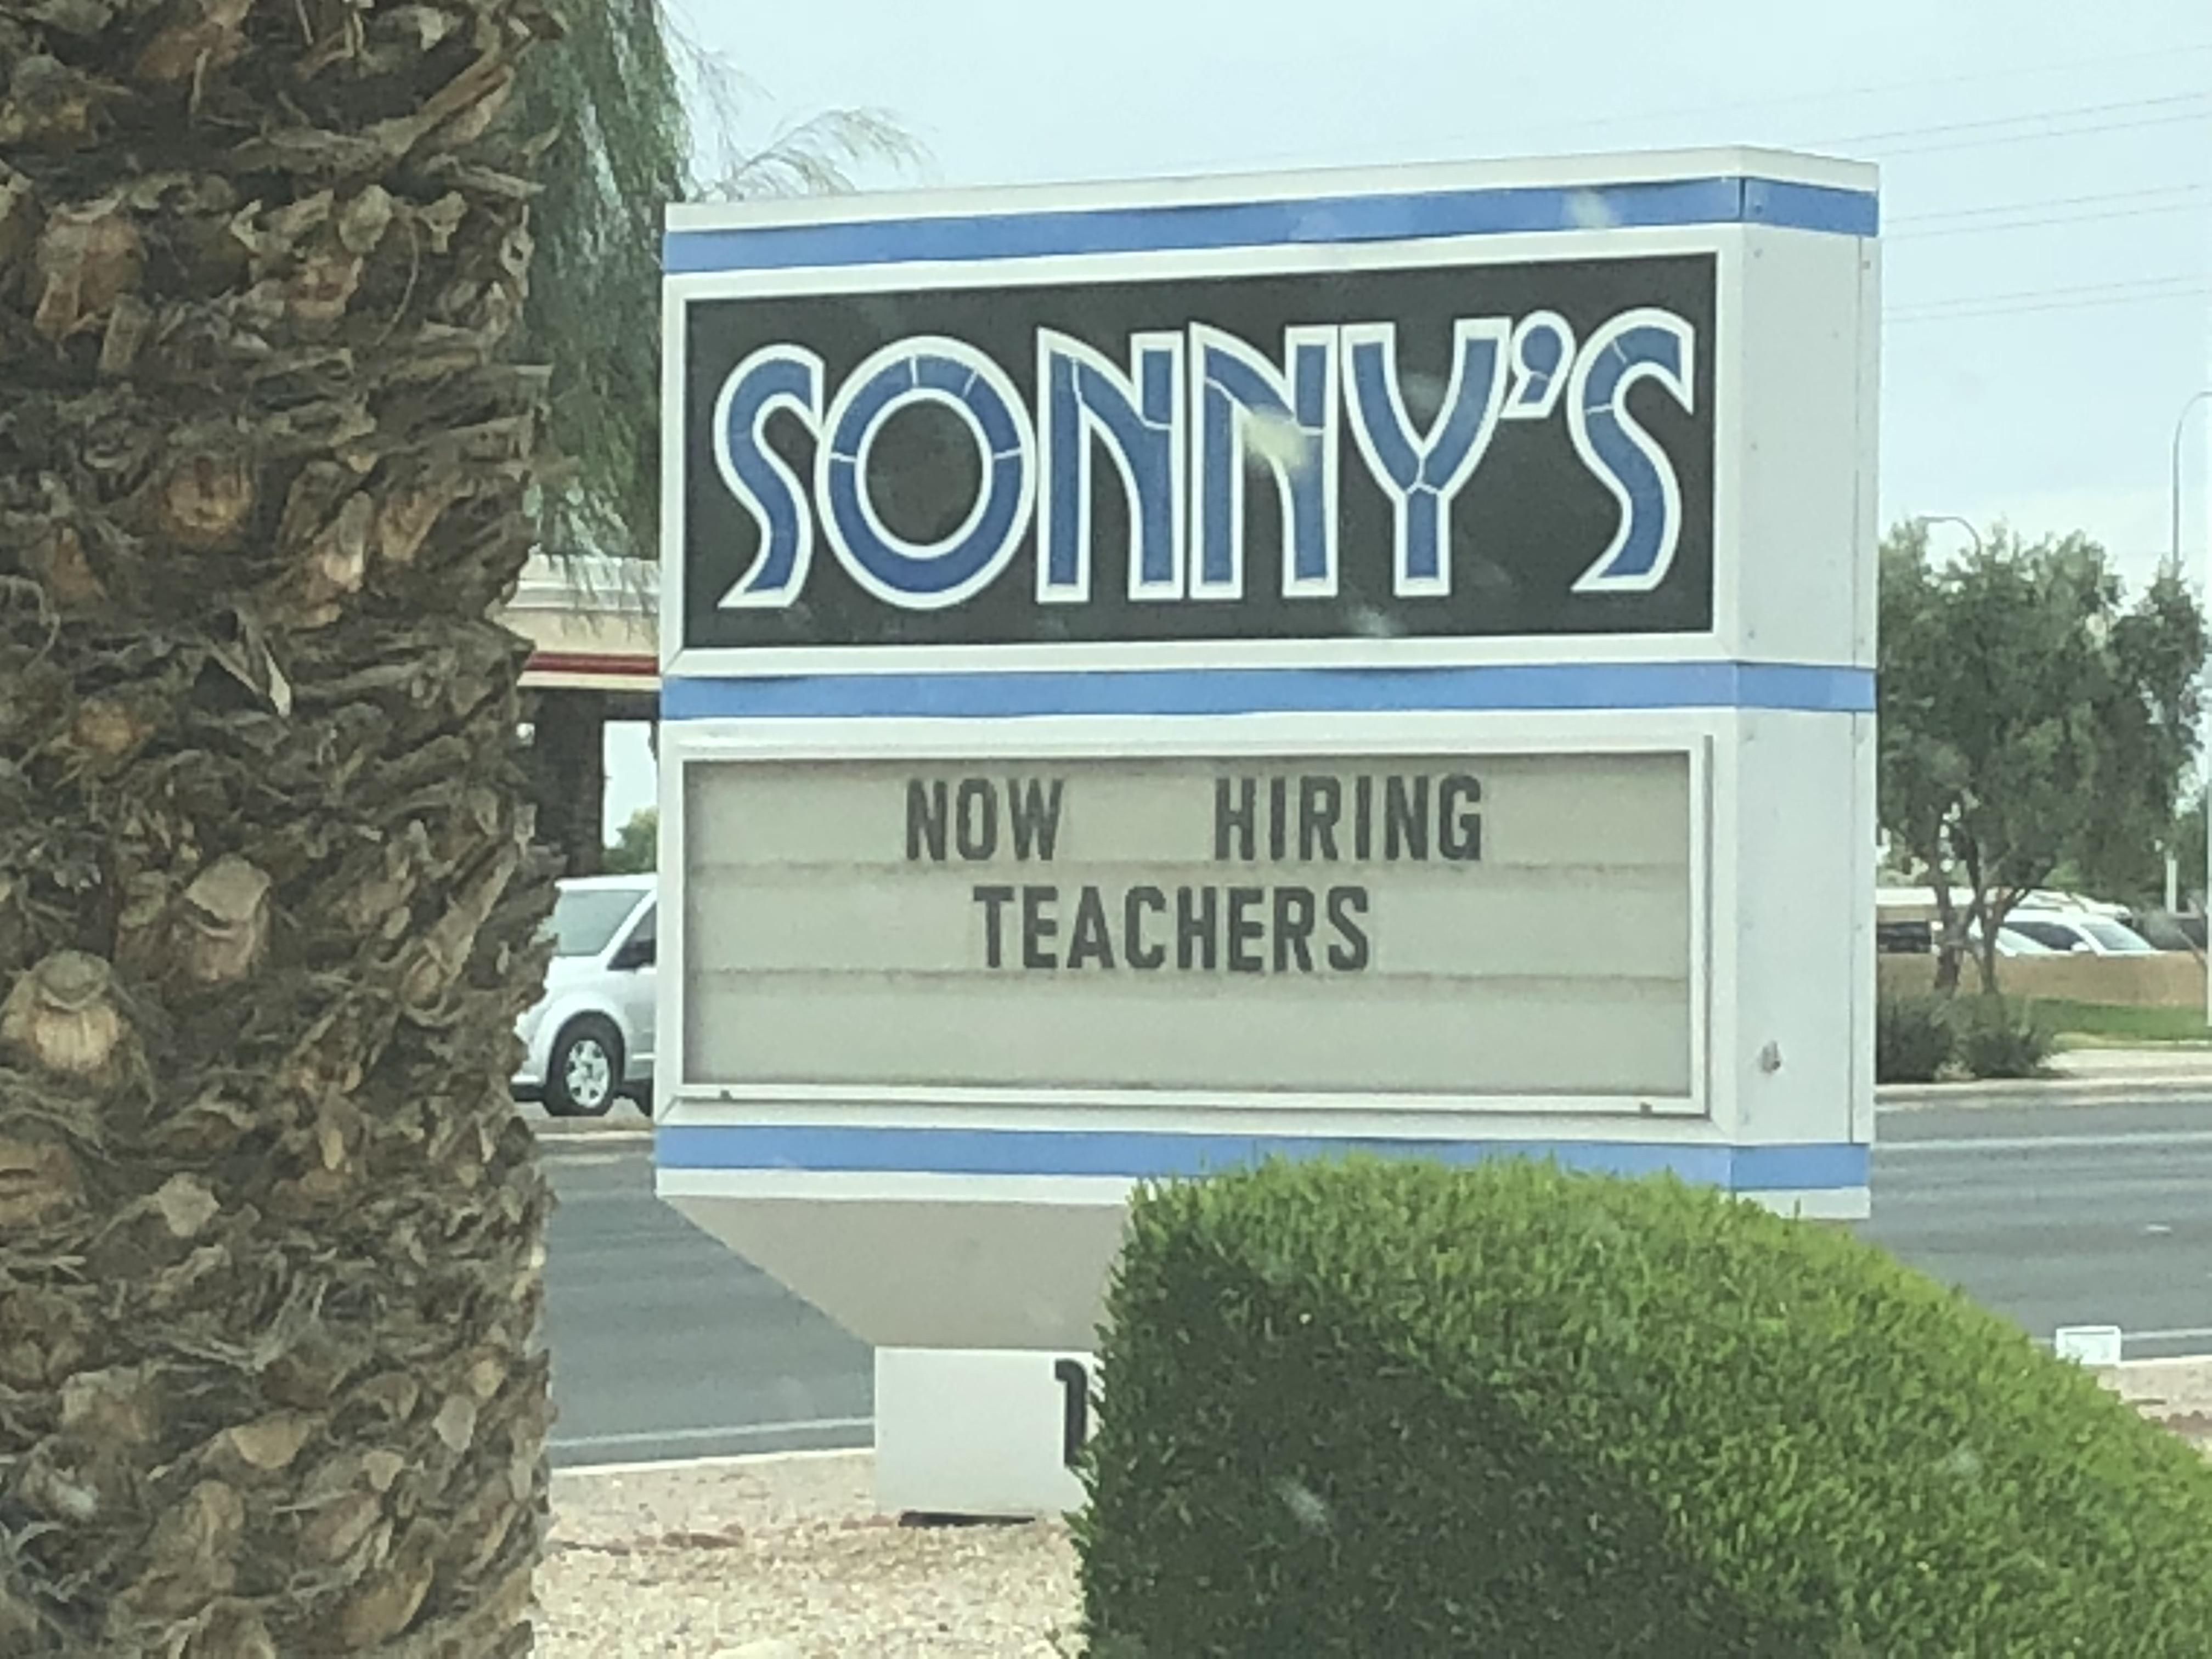 Sign at a Strip Club in Tucson, Az during the current Teachers Strike for higher pay wages.